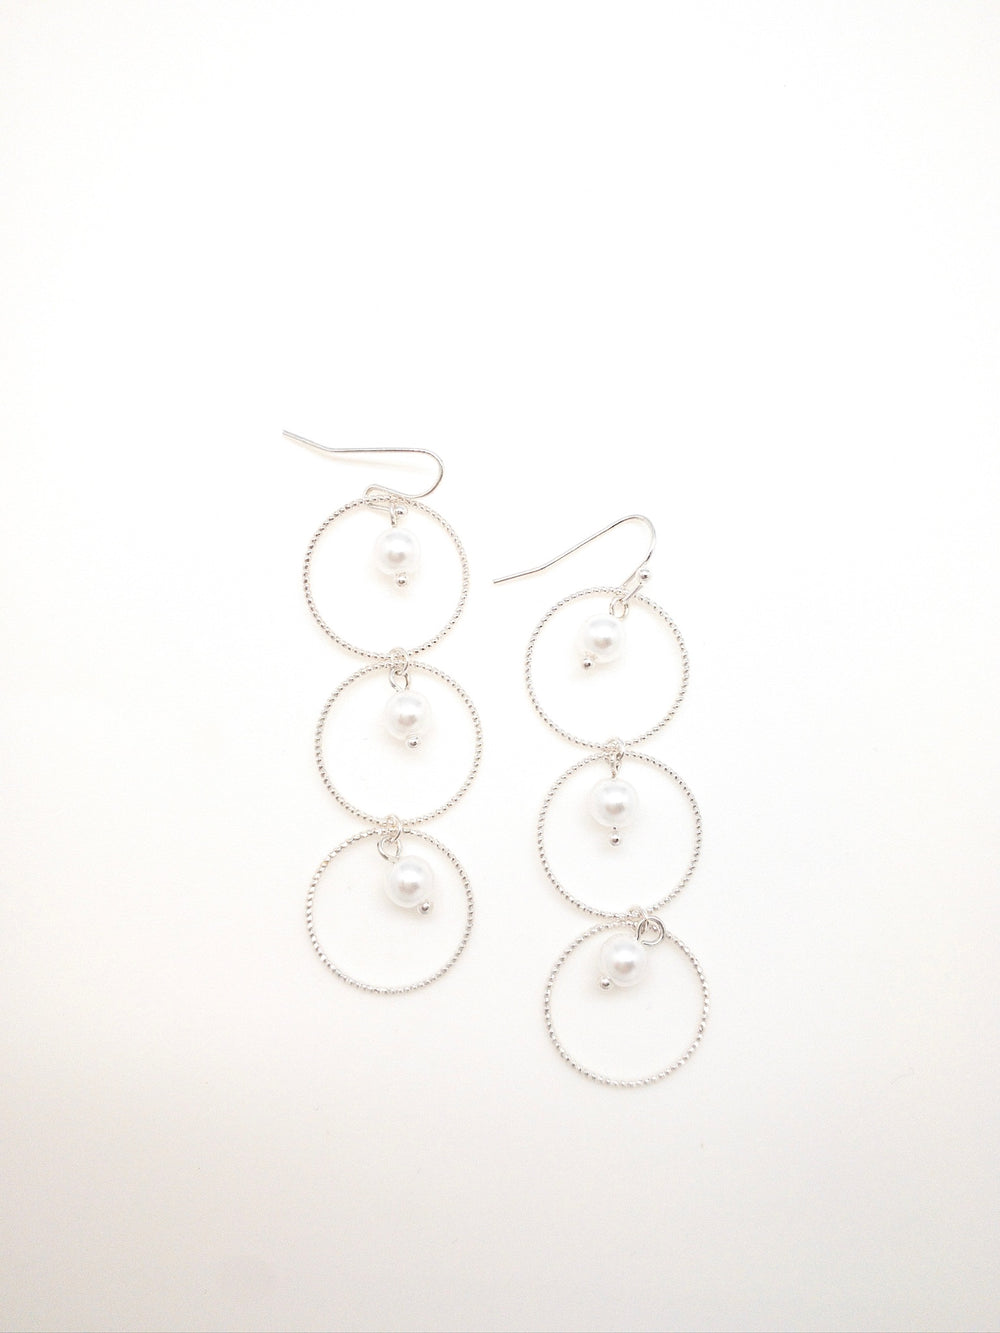 Christina earrings silver. 3 circles with pearls in center of each 